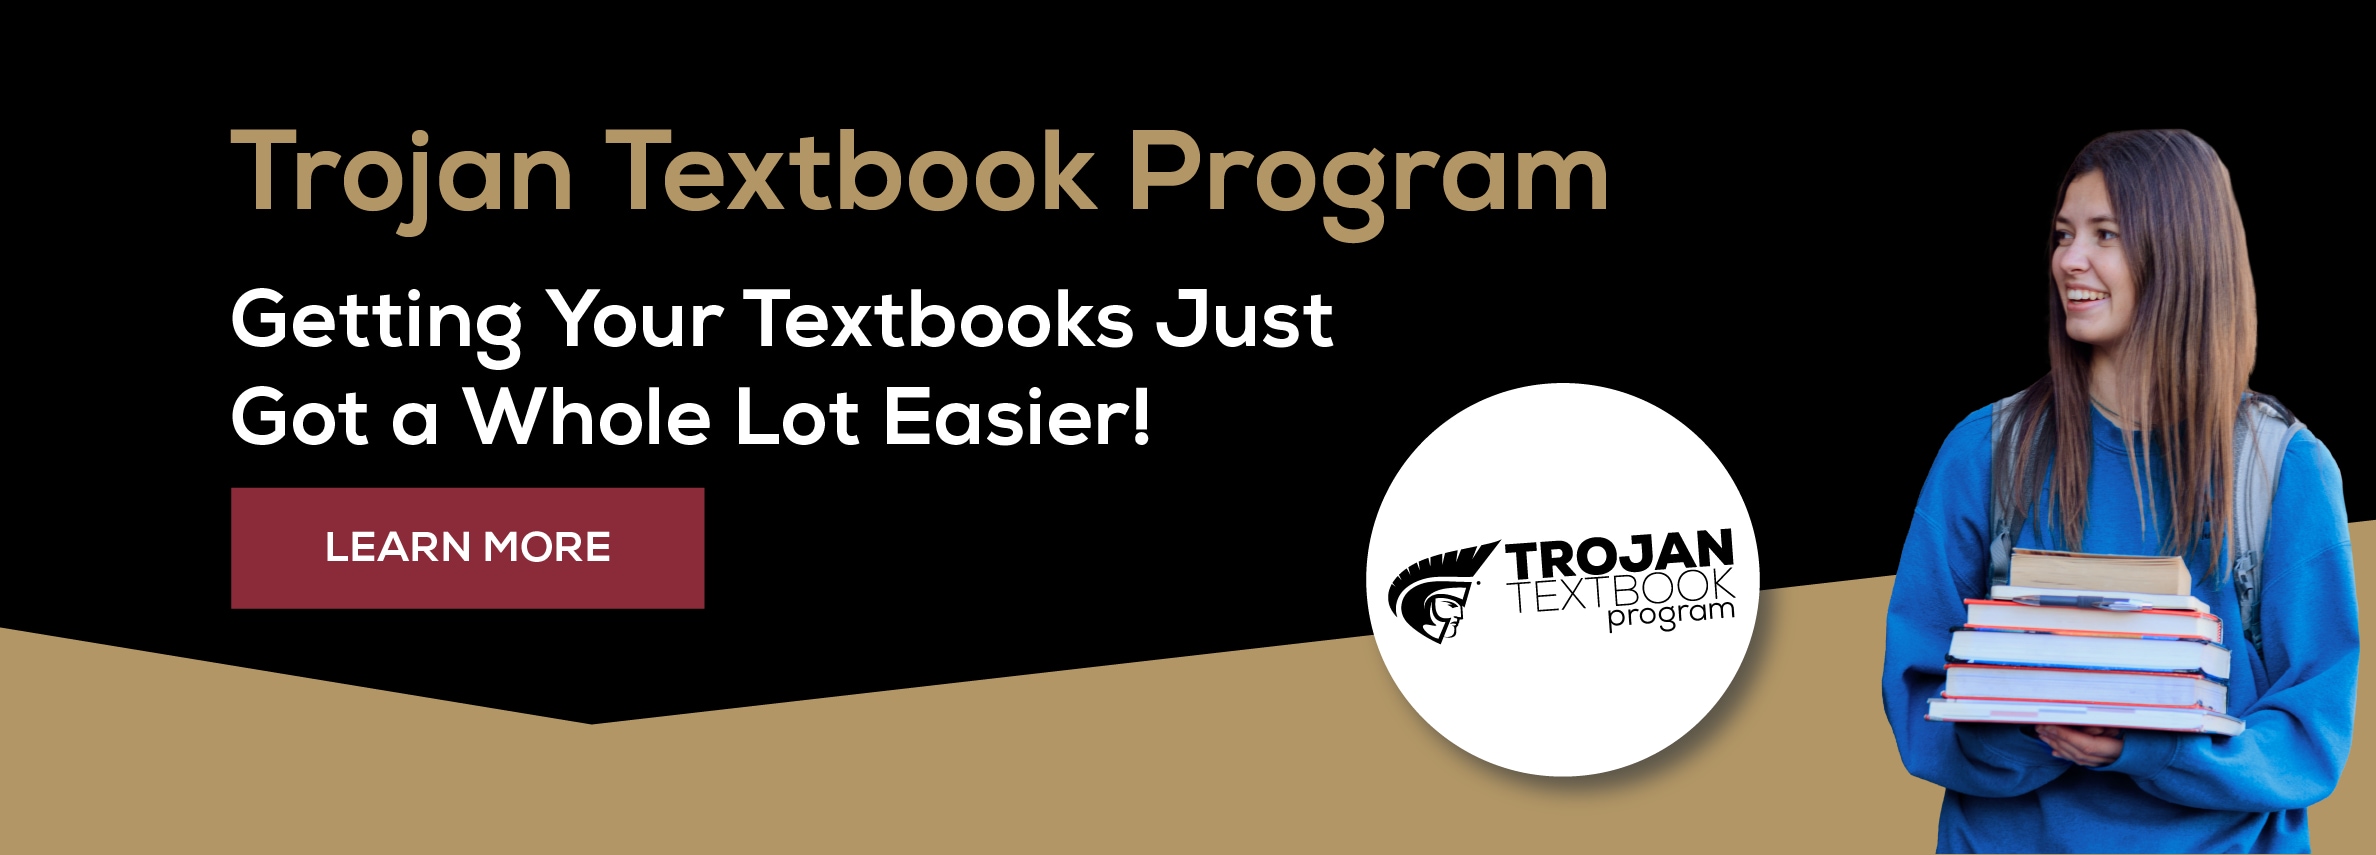 Trojan Textbook Program. Getting Your Textbooks Just Got a Whole Lot Easier! Learn More (new tab)